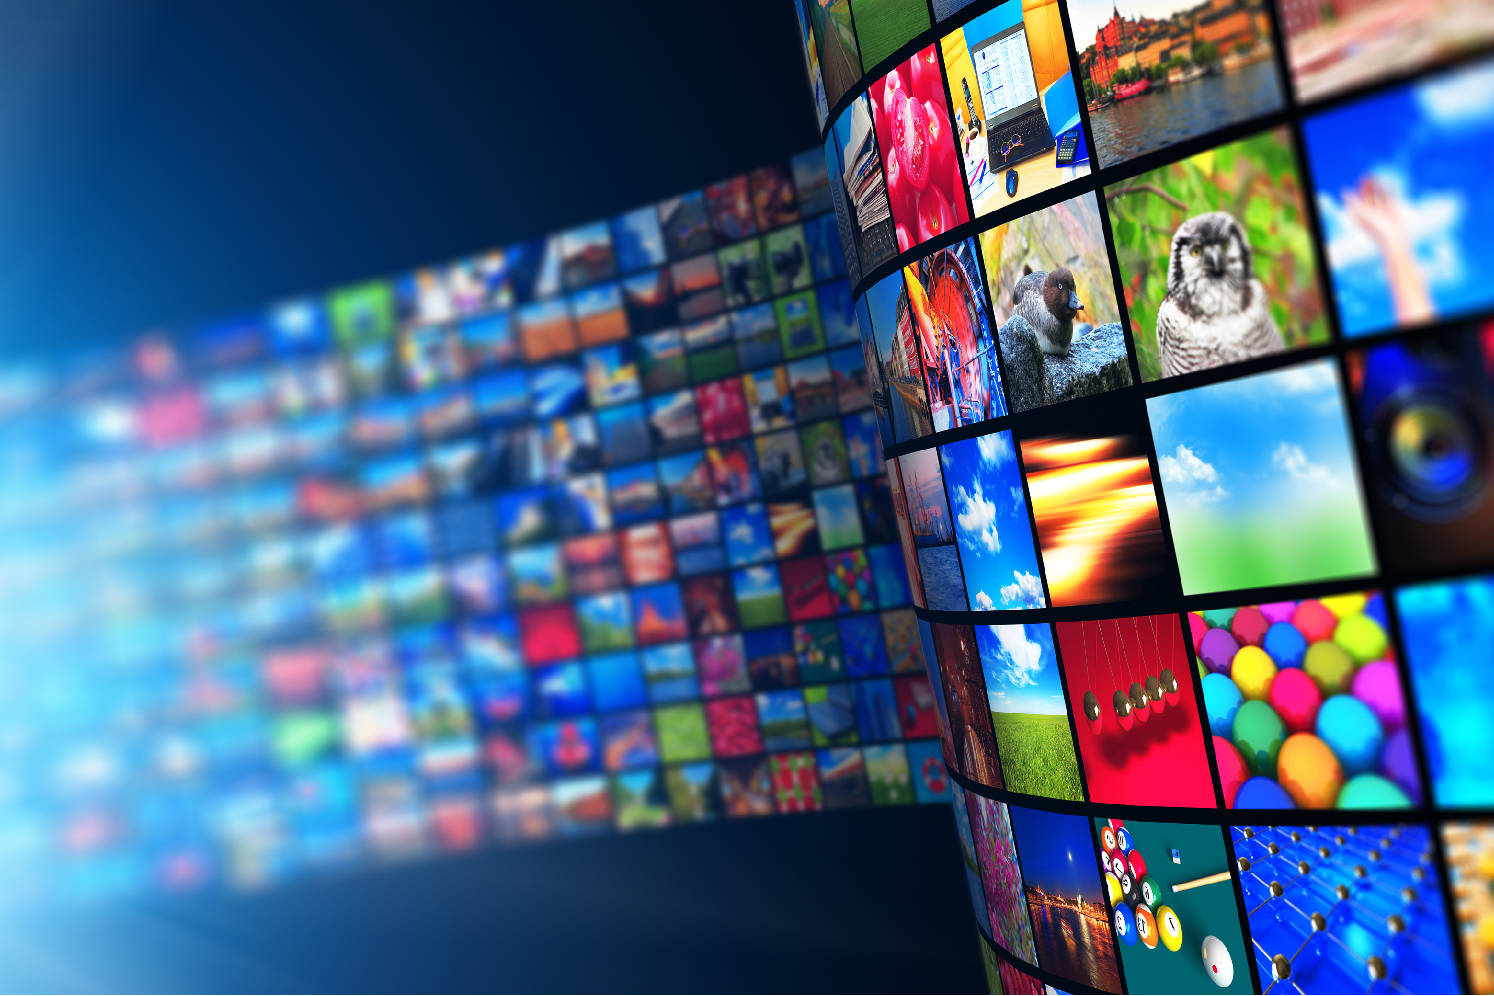 Video Streaming Services in South Korea